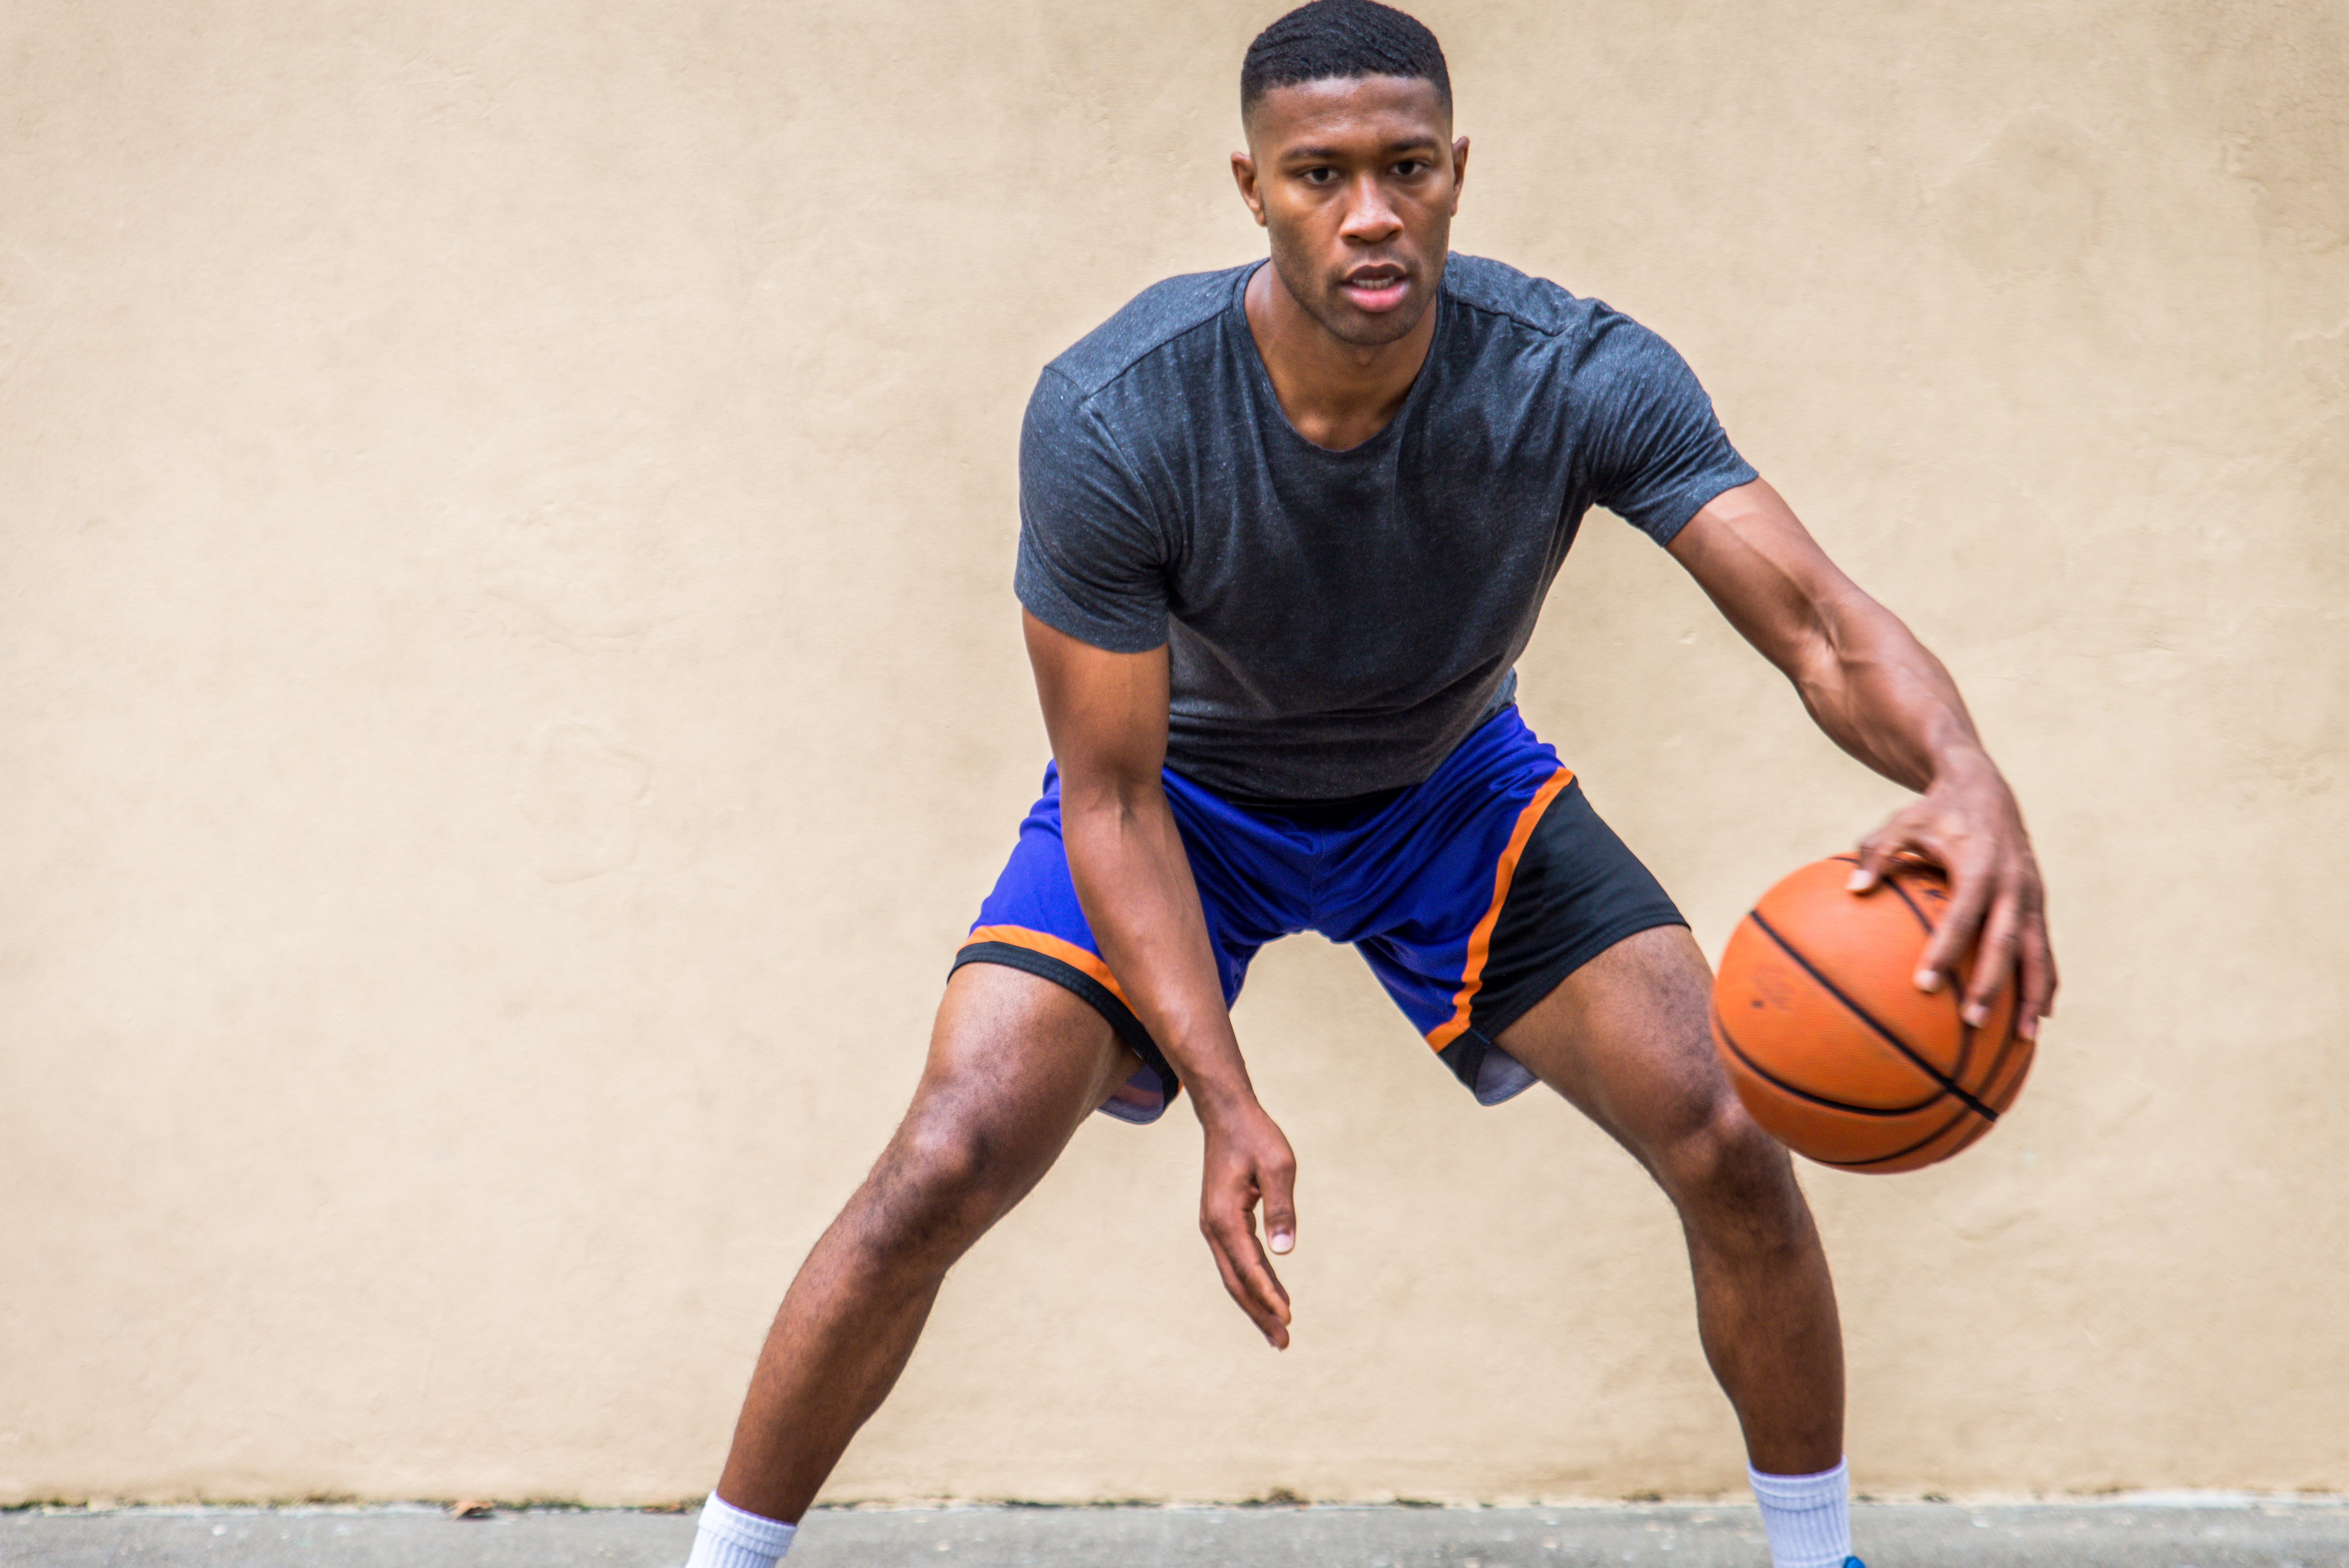 Basketball Player Training Outdoors